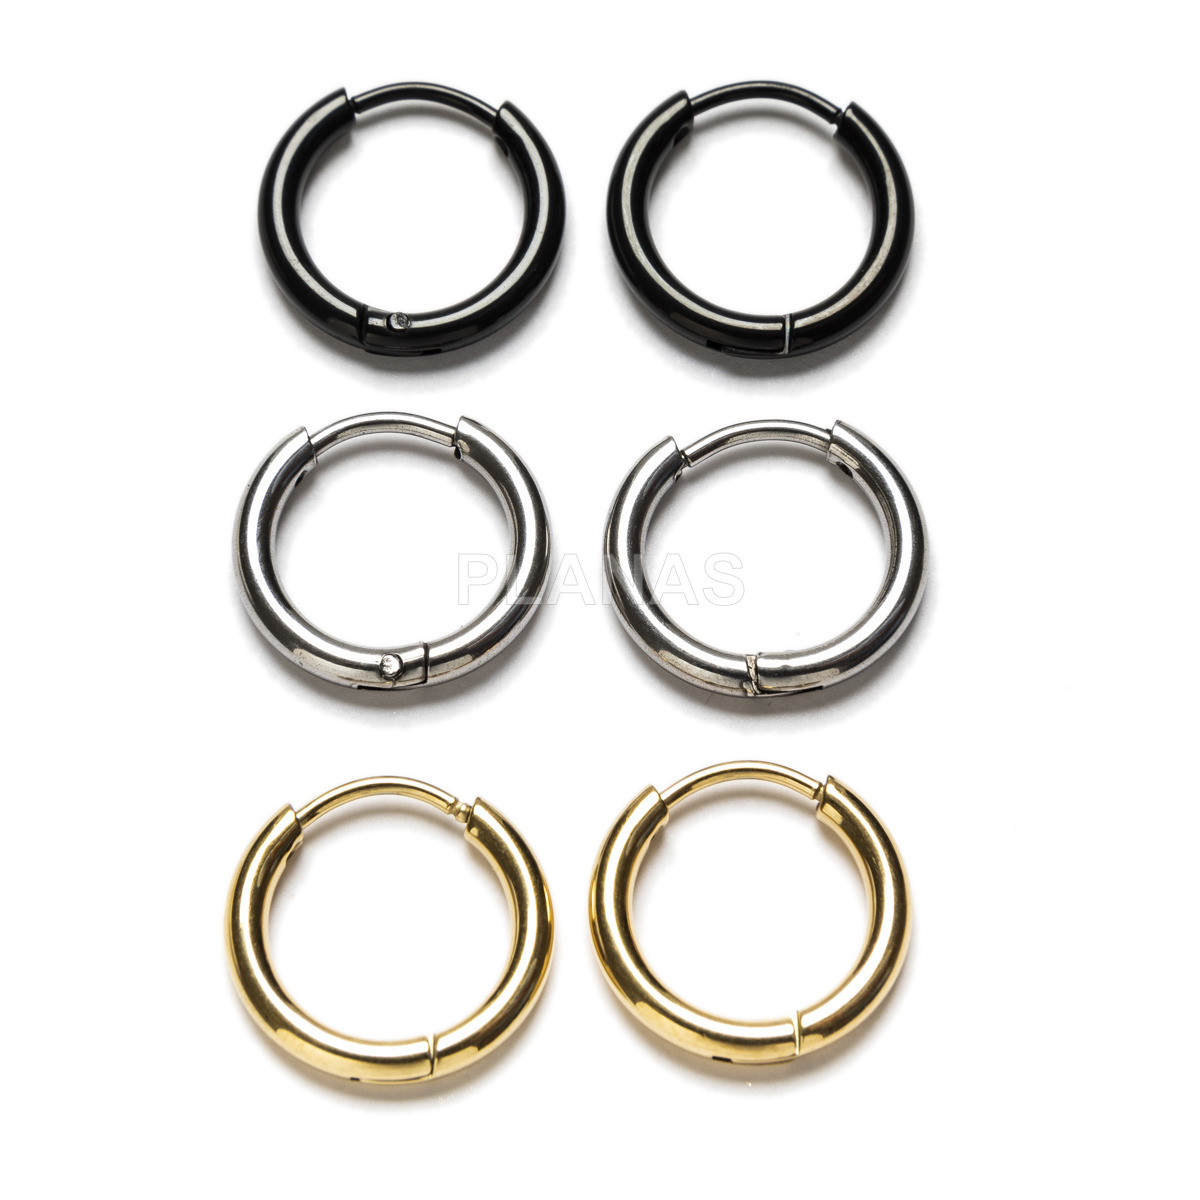 Rings in stainless steel 304 with a thickness of 2mm. 2x18mm.